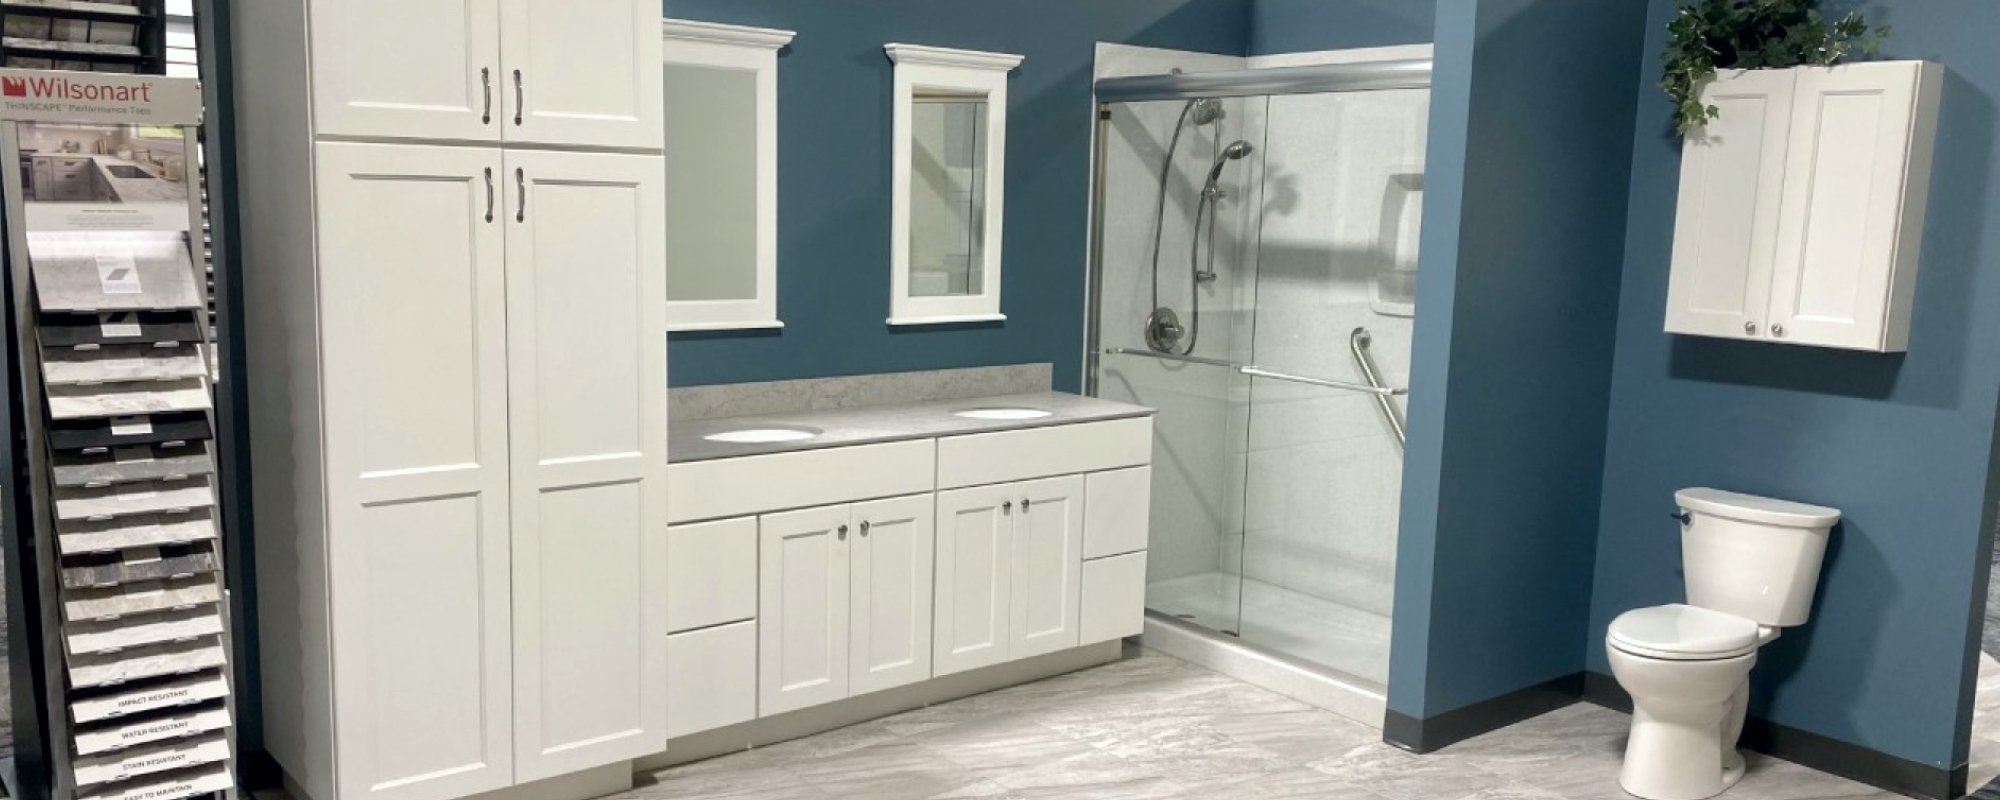 bathroom showroom - Taylorville Home Source in Taylorville